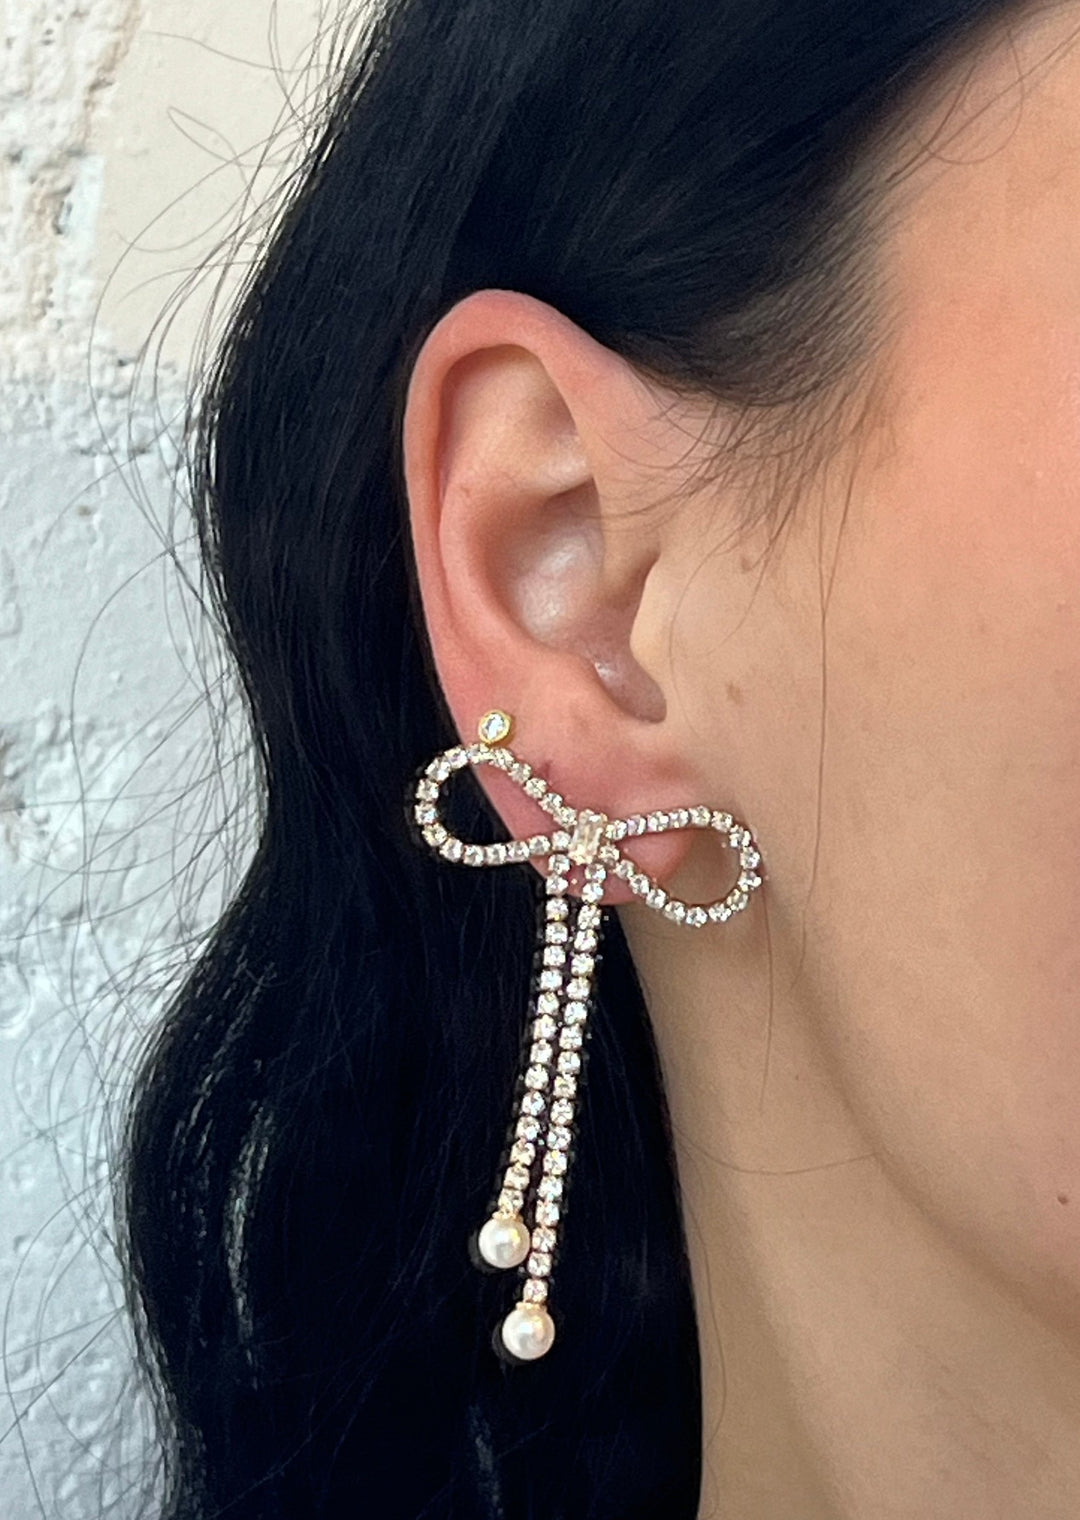 Danika Bow Earrings, Jewelry, Adeline, Adeline, dallas boutique, dallas texas, texas boutique, women's boutique dallas, adeline boutique, dallas boutique, trendy boutique, affordable boutique